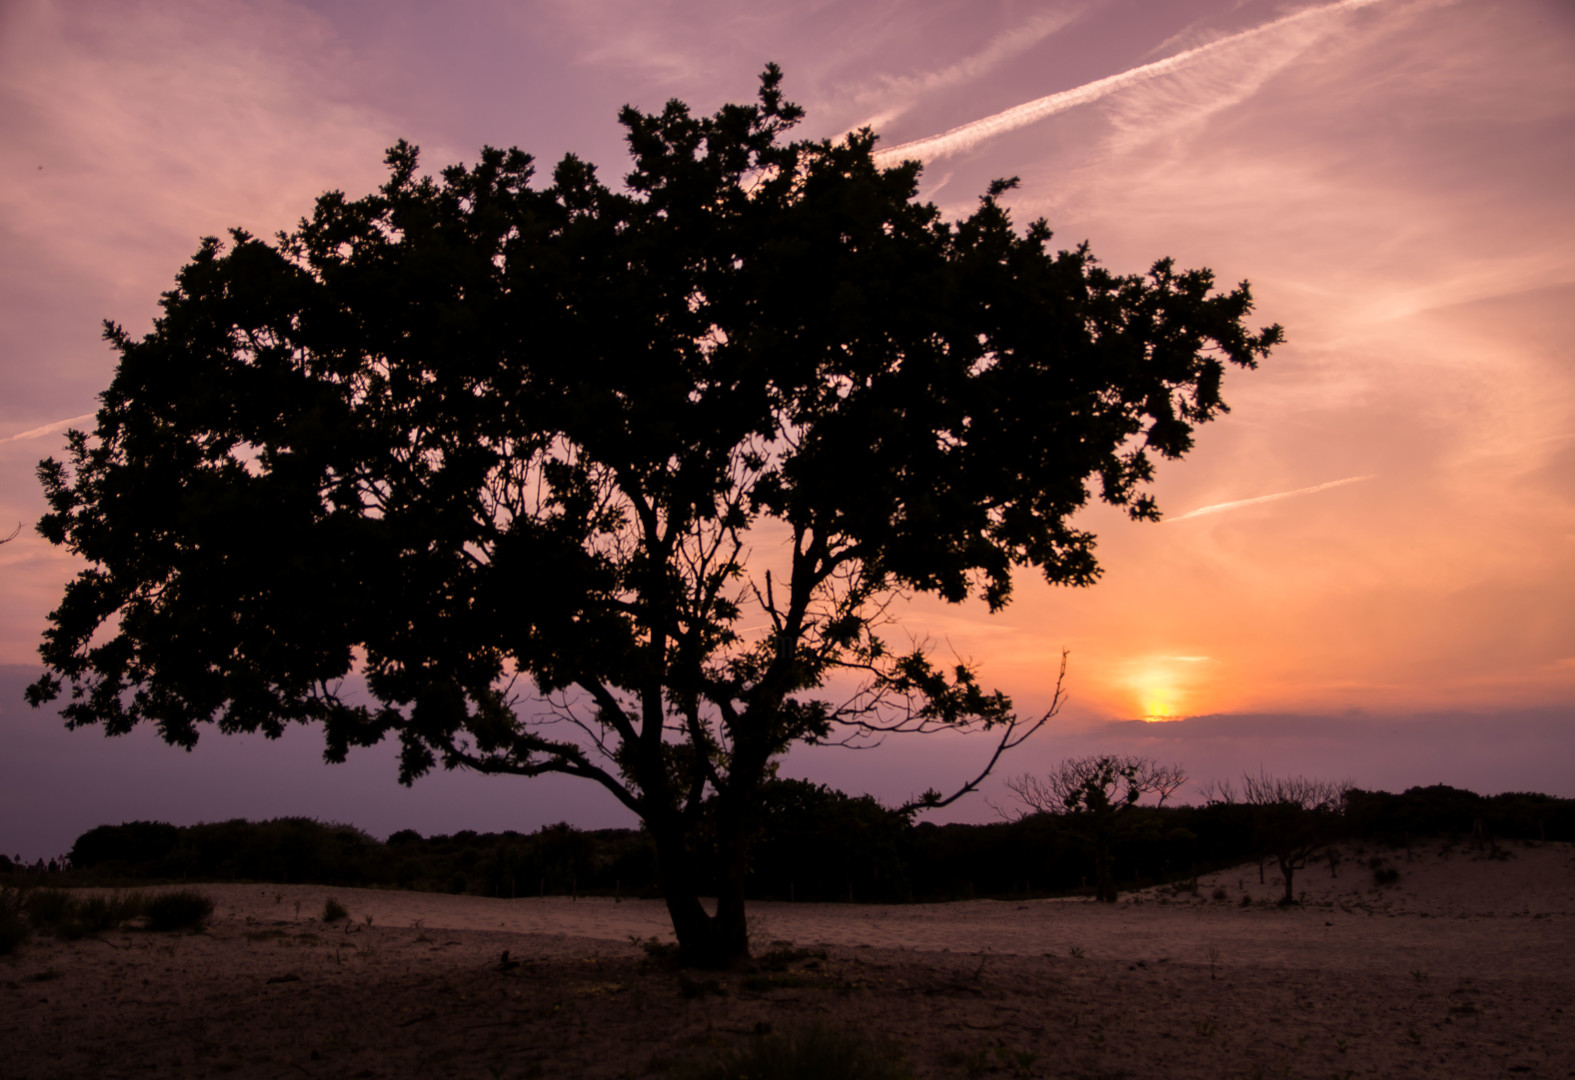 Sunset With Tree Silhouette 2 Photography By Wouter Kouwenberg Artmajeur